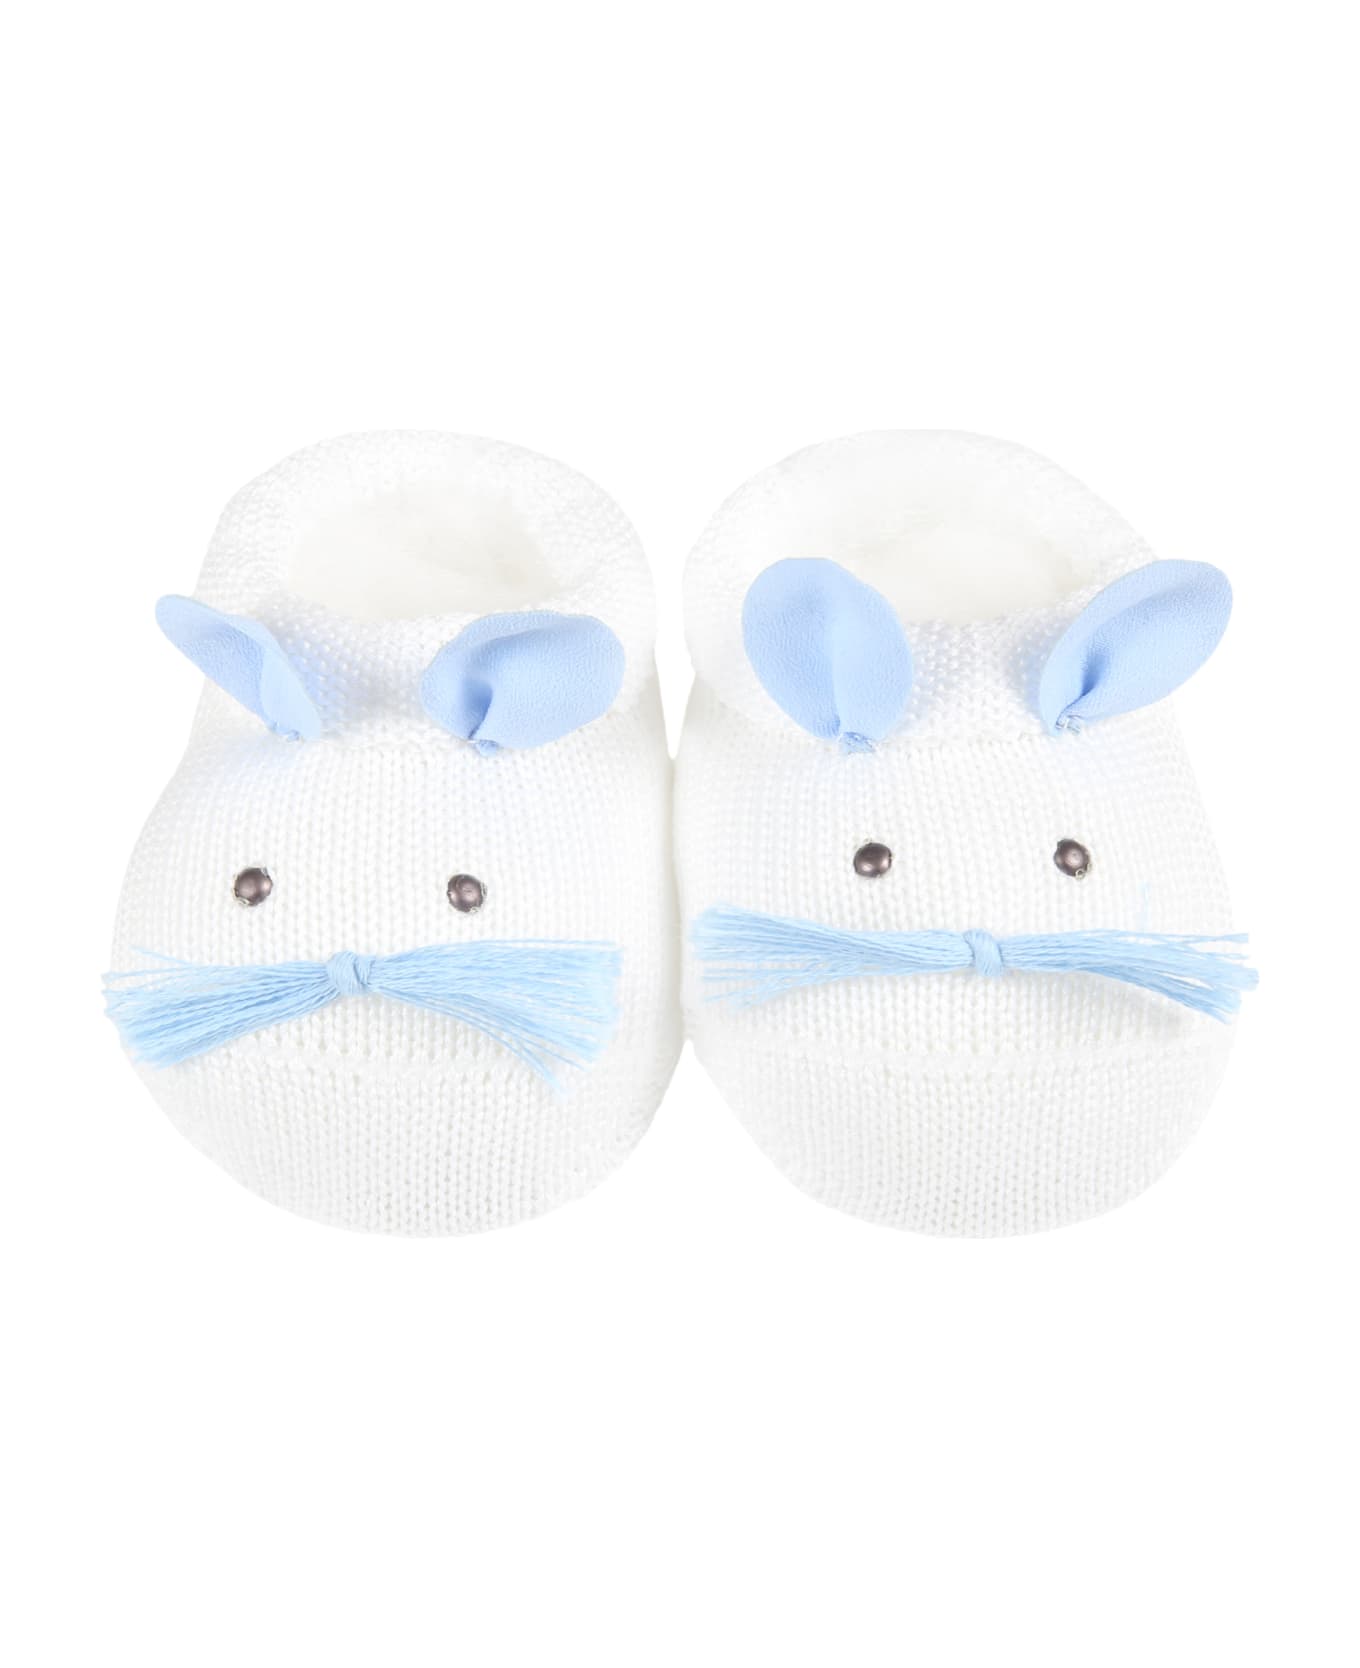 Story Loris White Baby-bootee For Baby Boy - White